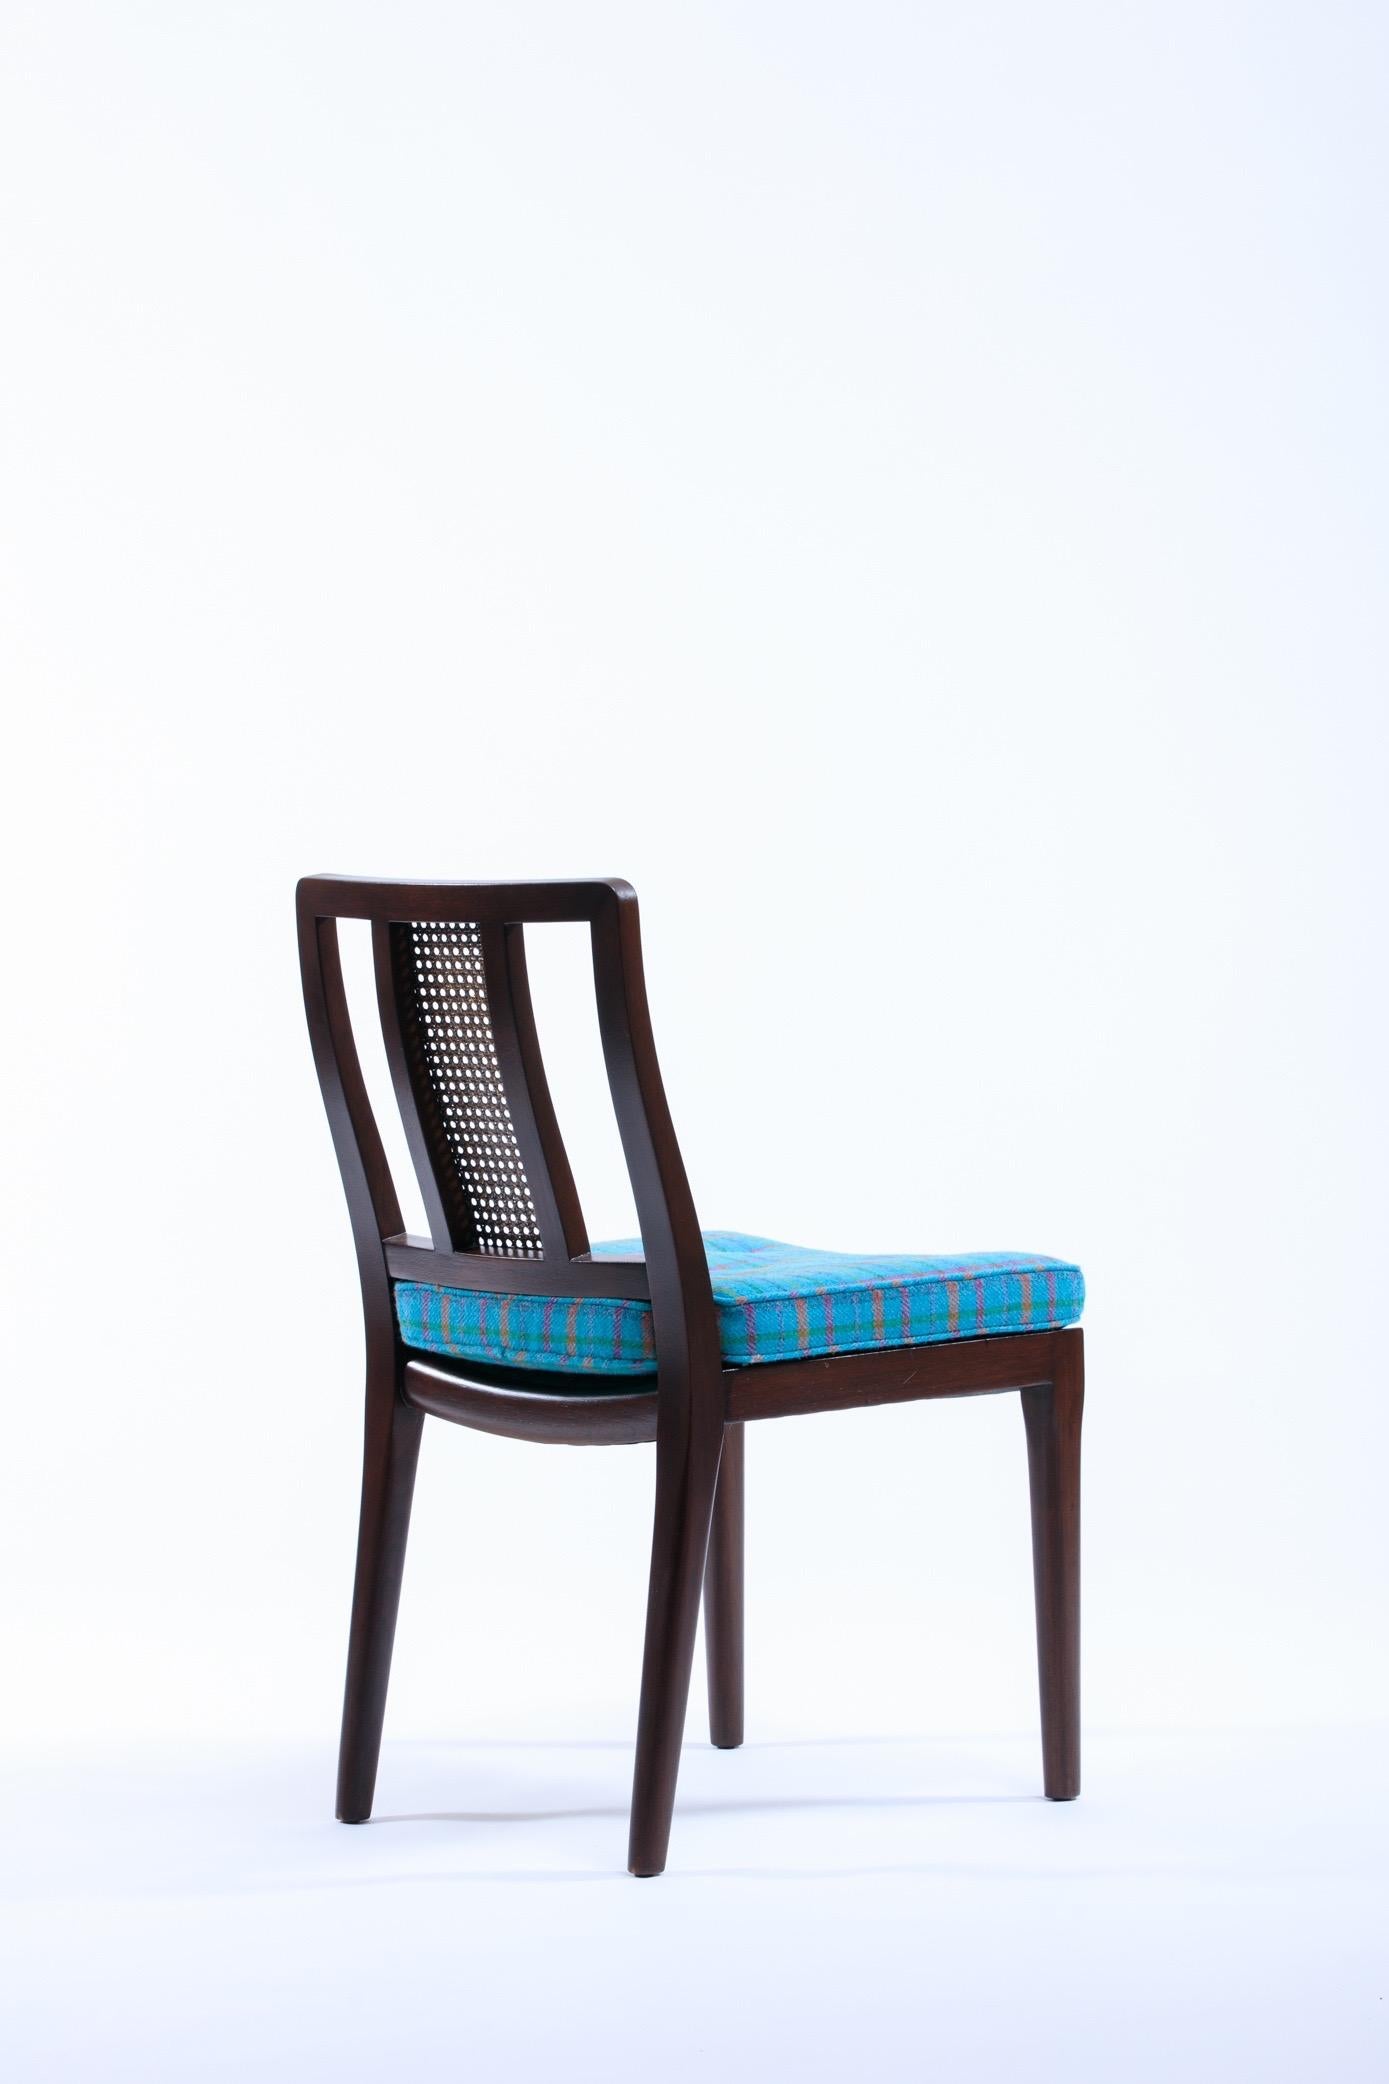 Mid-Century Modern Set of 6 Edward Wormley for Dunbar Blue Dining Chairs with Cane Backs, c. 1958